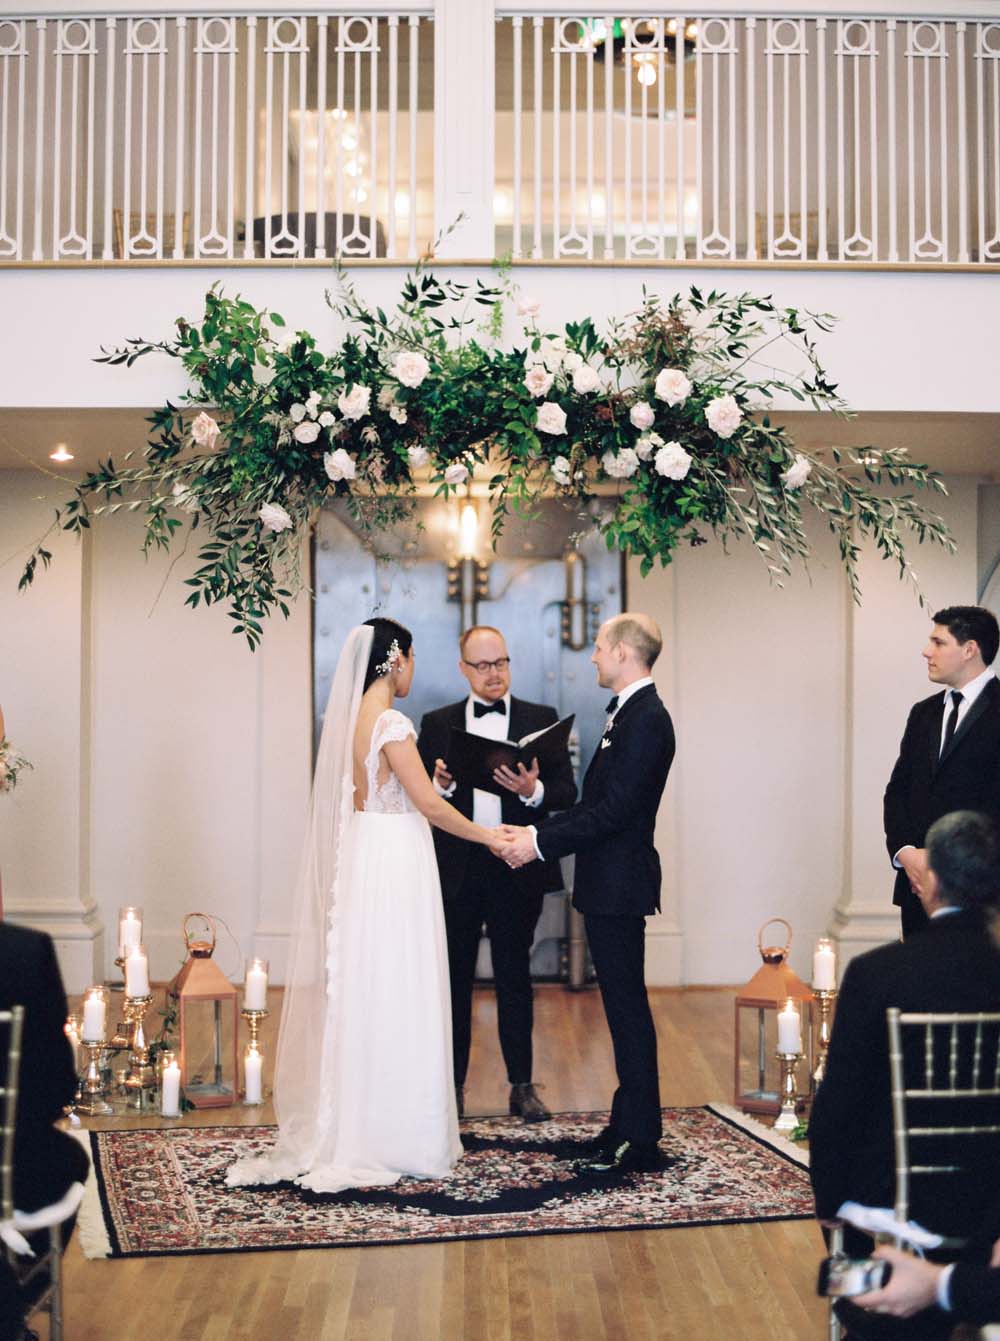 a timeless, romantic wedding in vancouver - ceremony